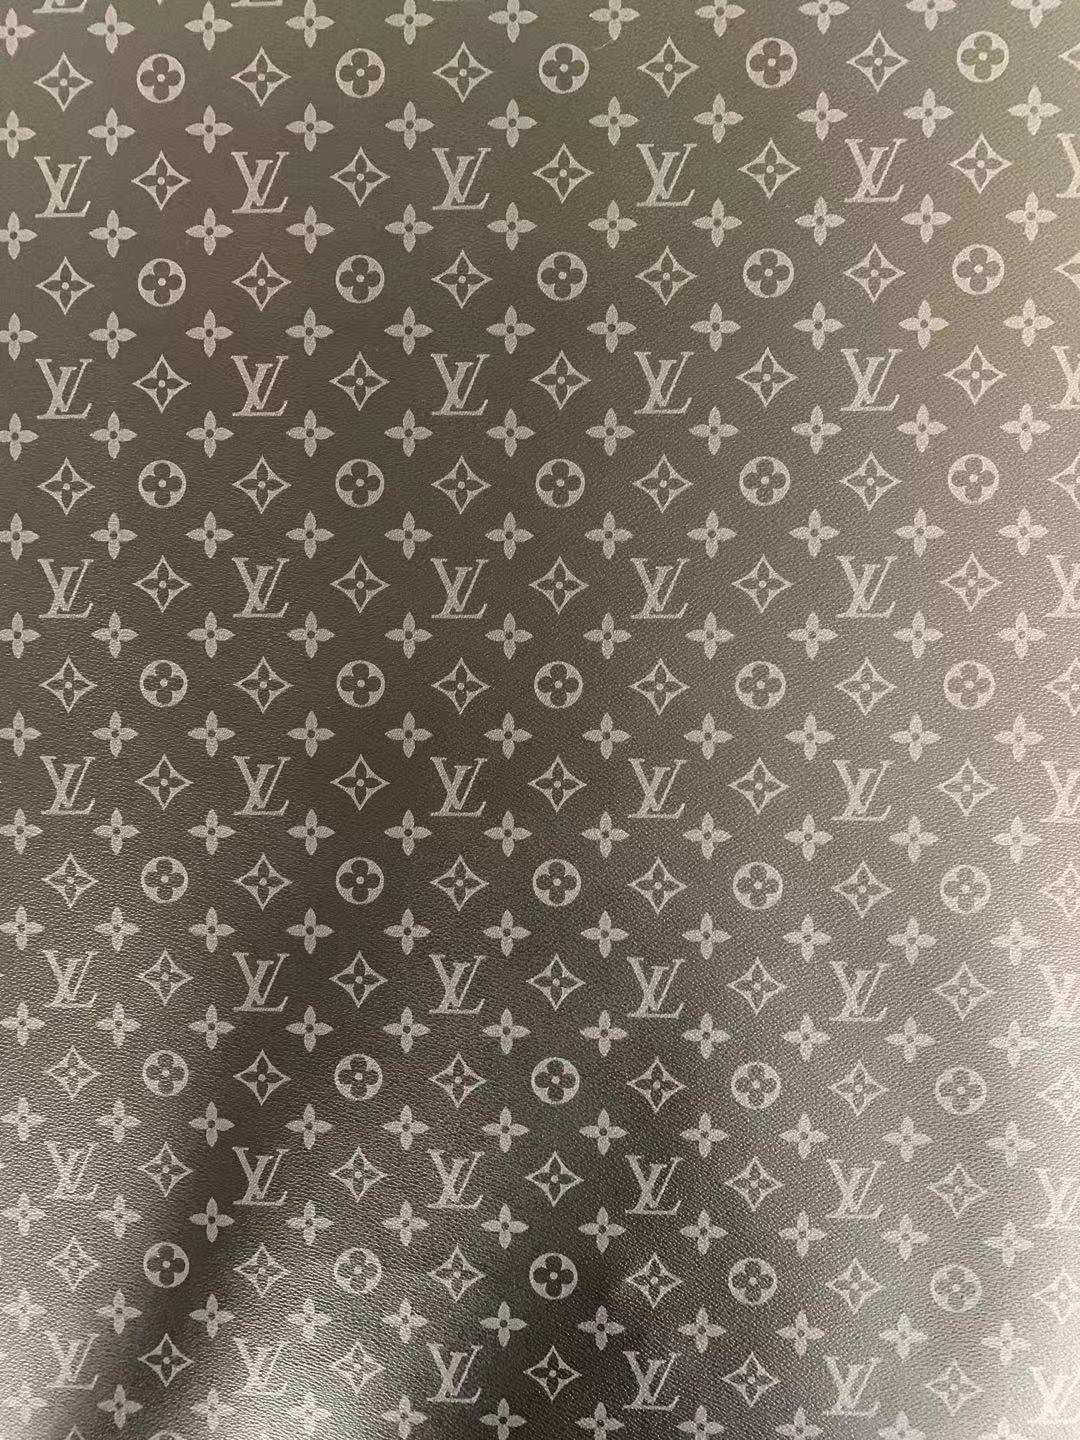 Classic LV vinyl crafting leather fabric for bag leather, shoe leather